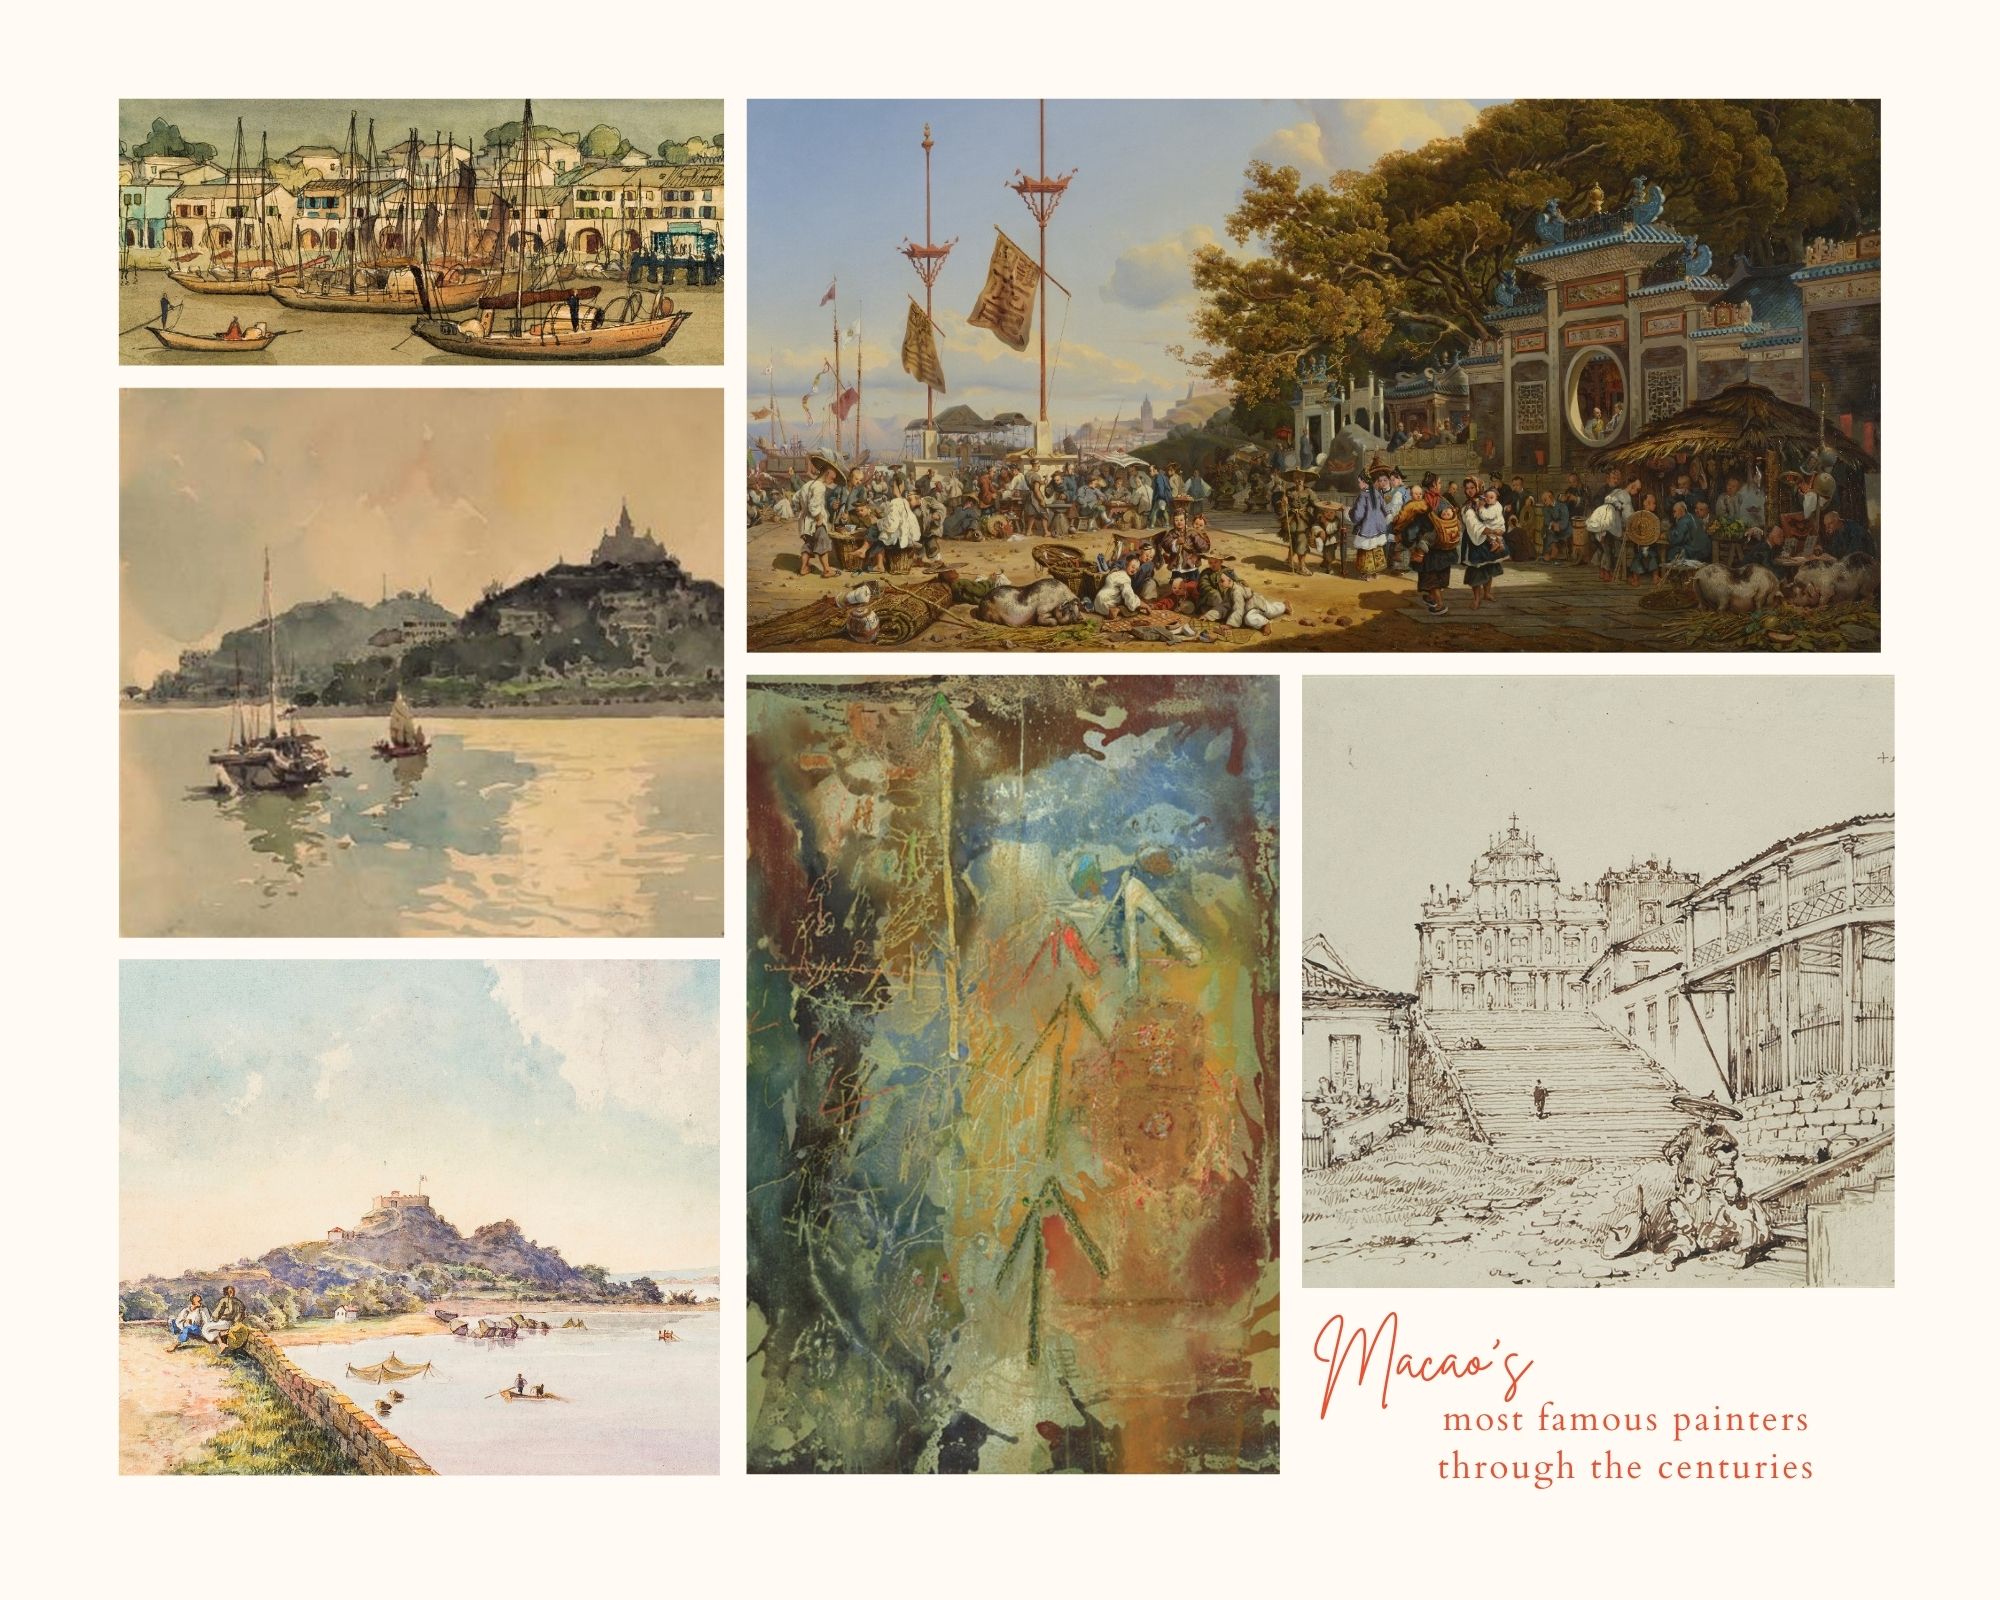 6 of Macao’s most famous painters through the centuries